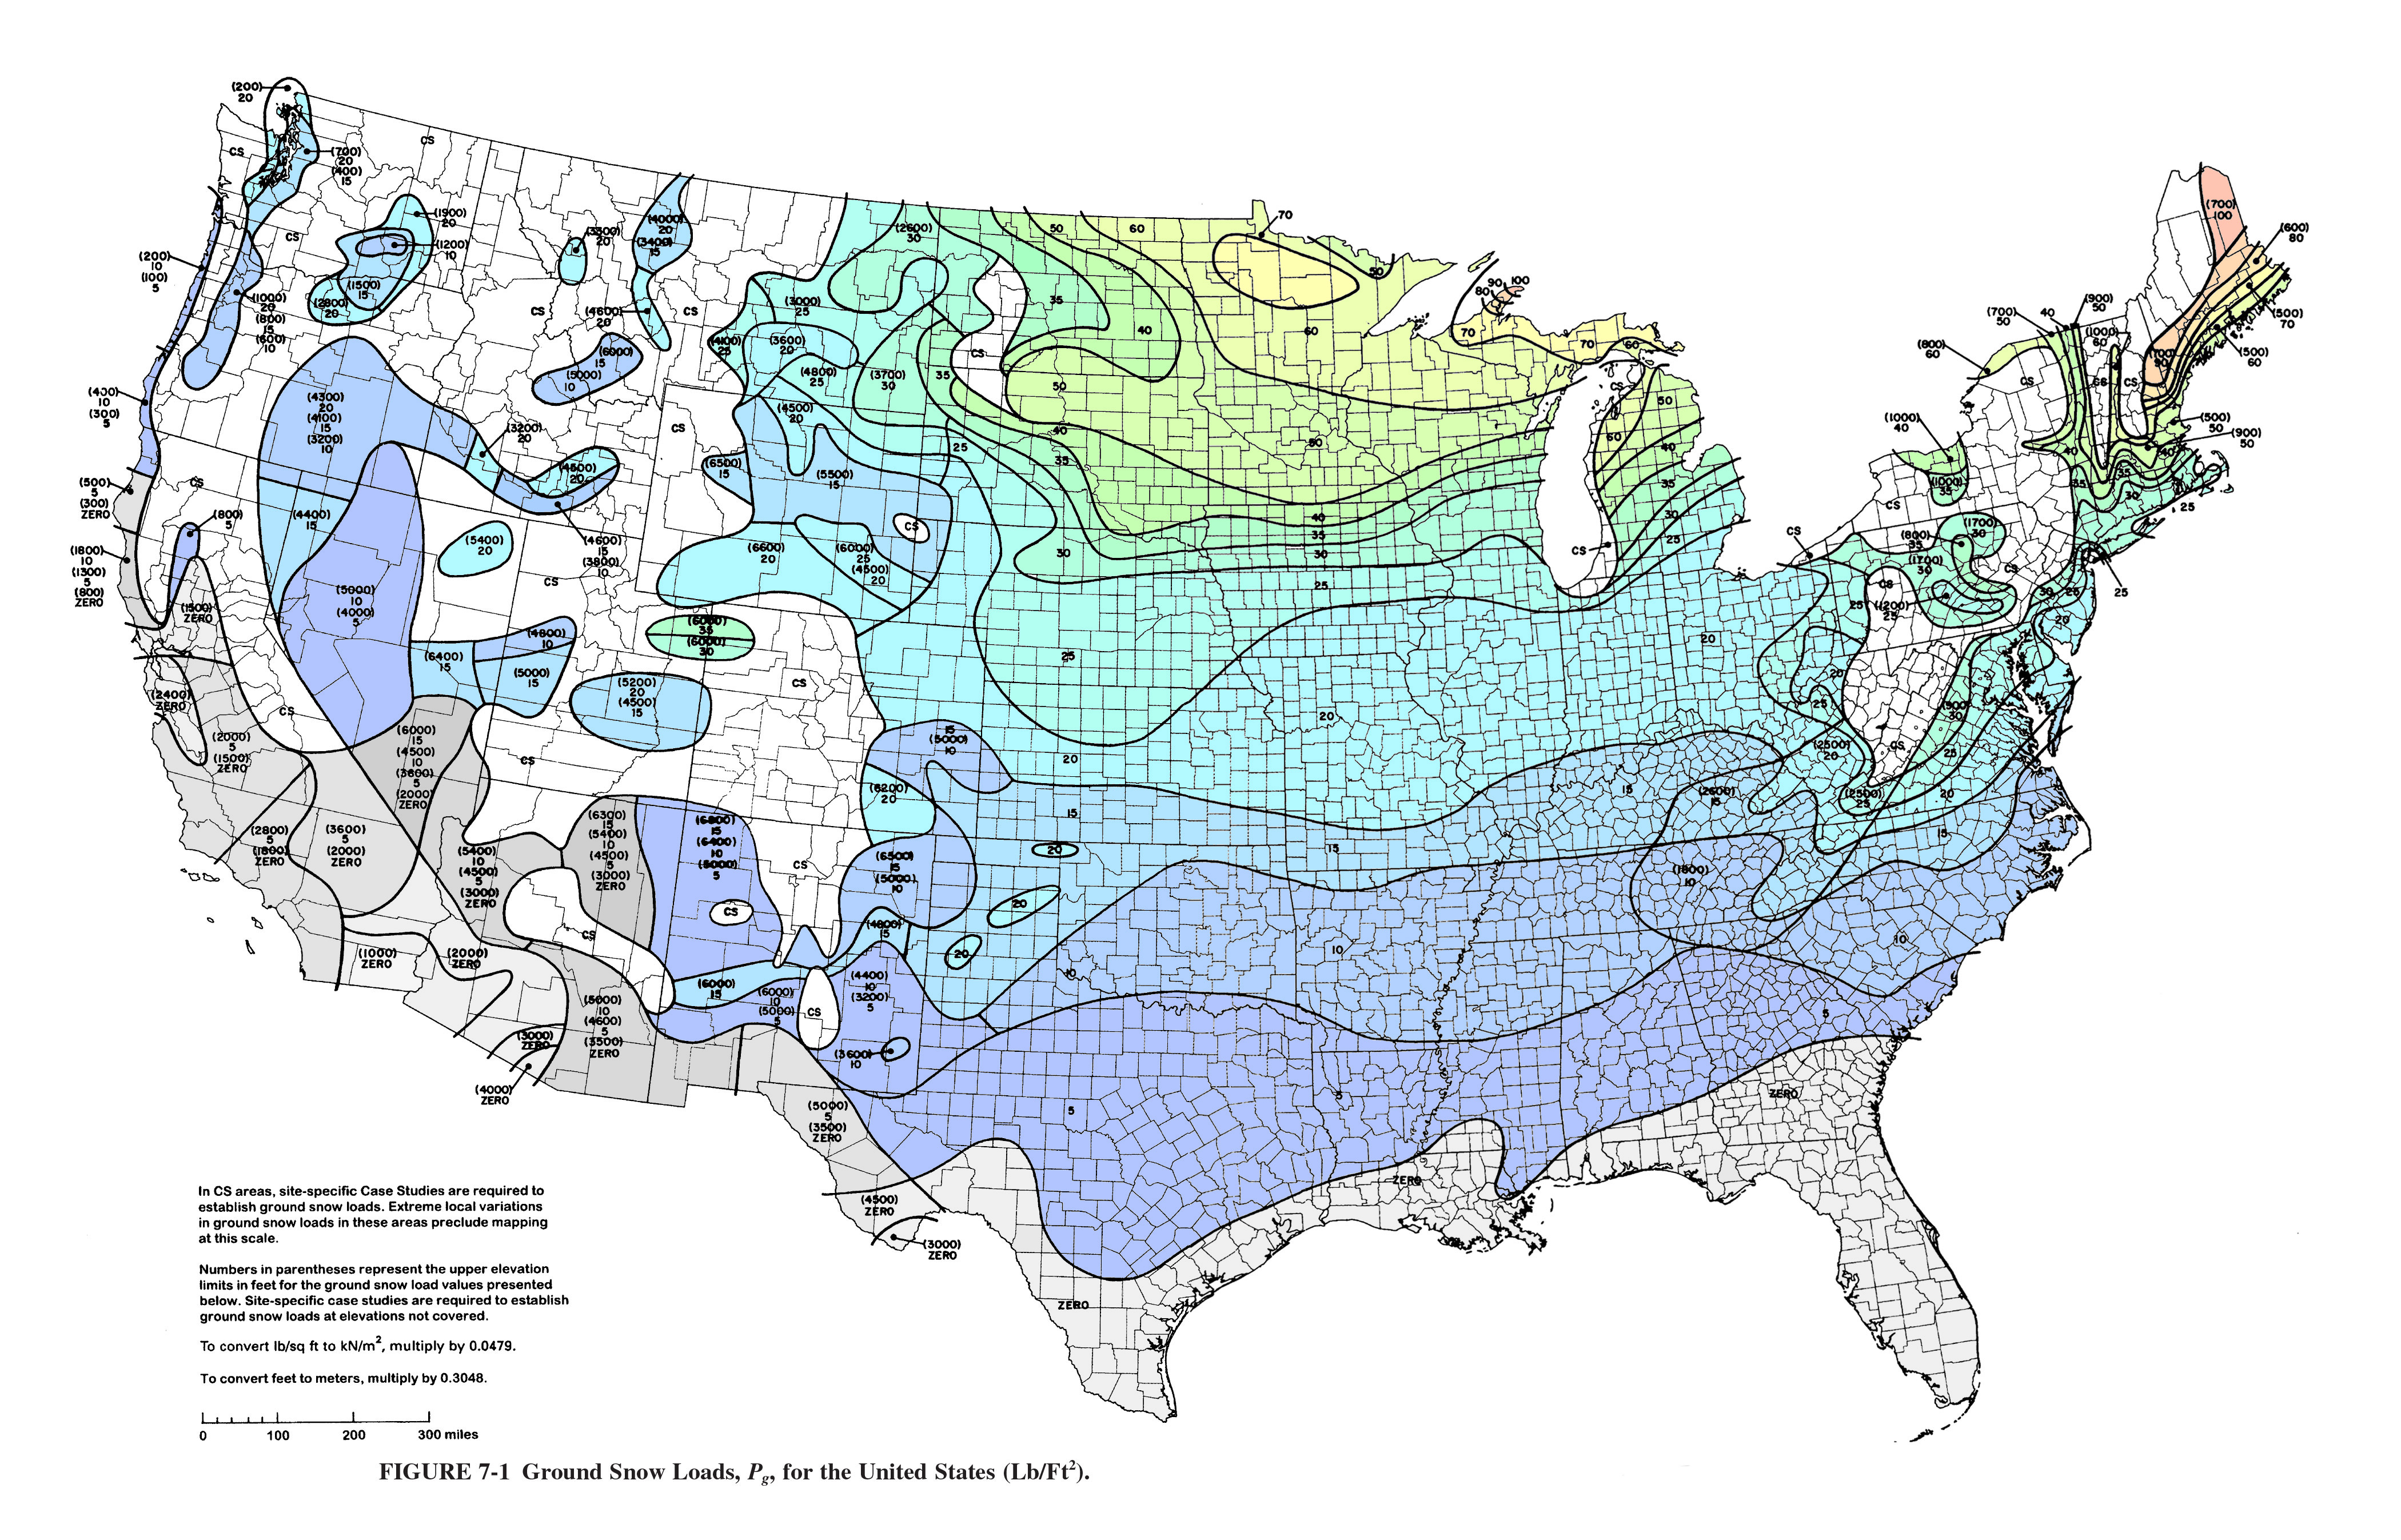 Design Snow Loads Map for the United States, adapted from ASCE 7-10, Figure 7-1.